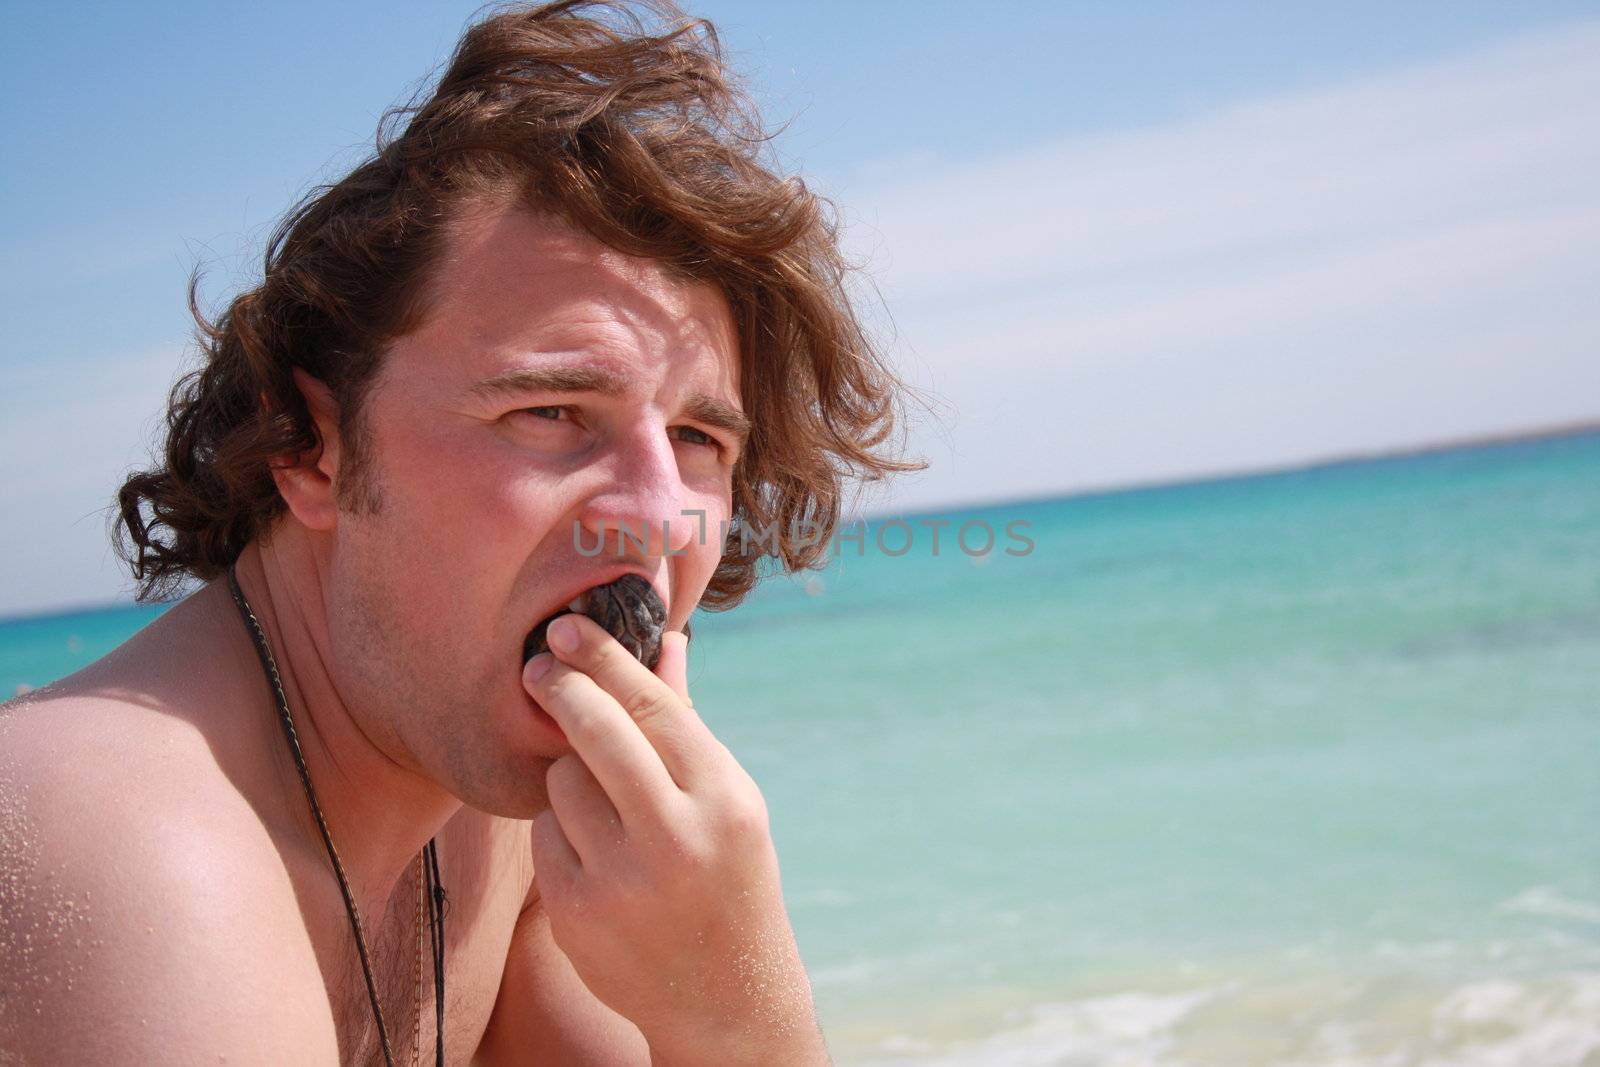 man eating on the beach on vacation